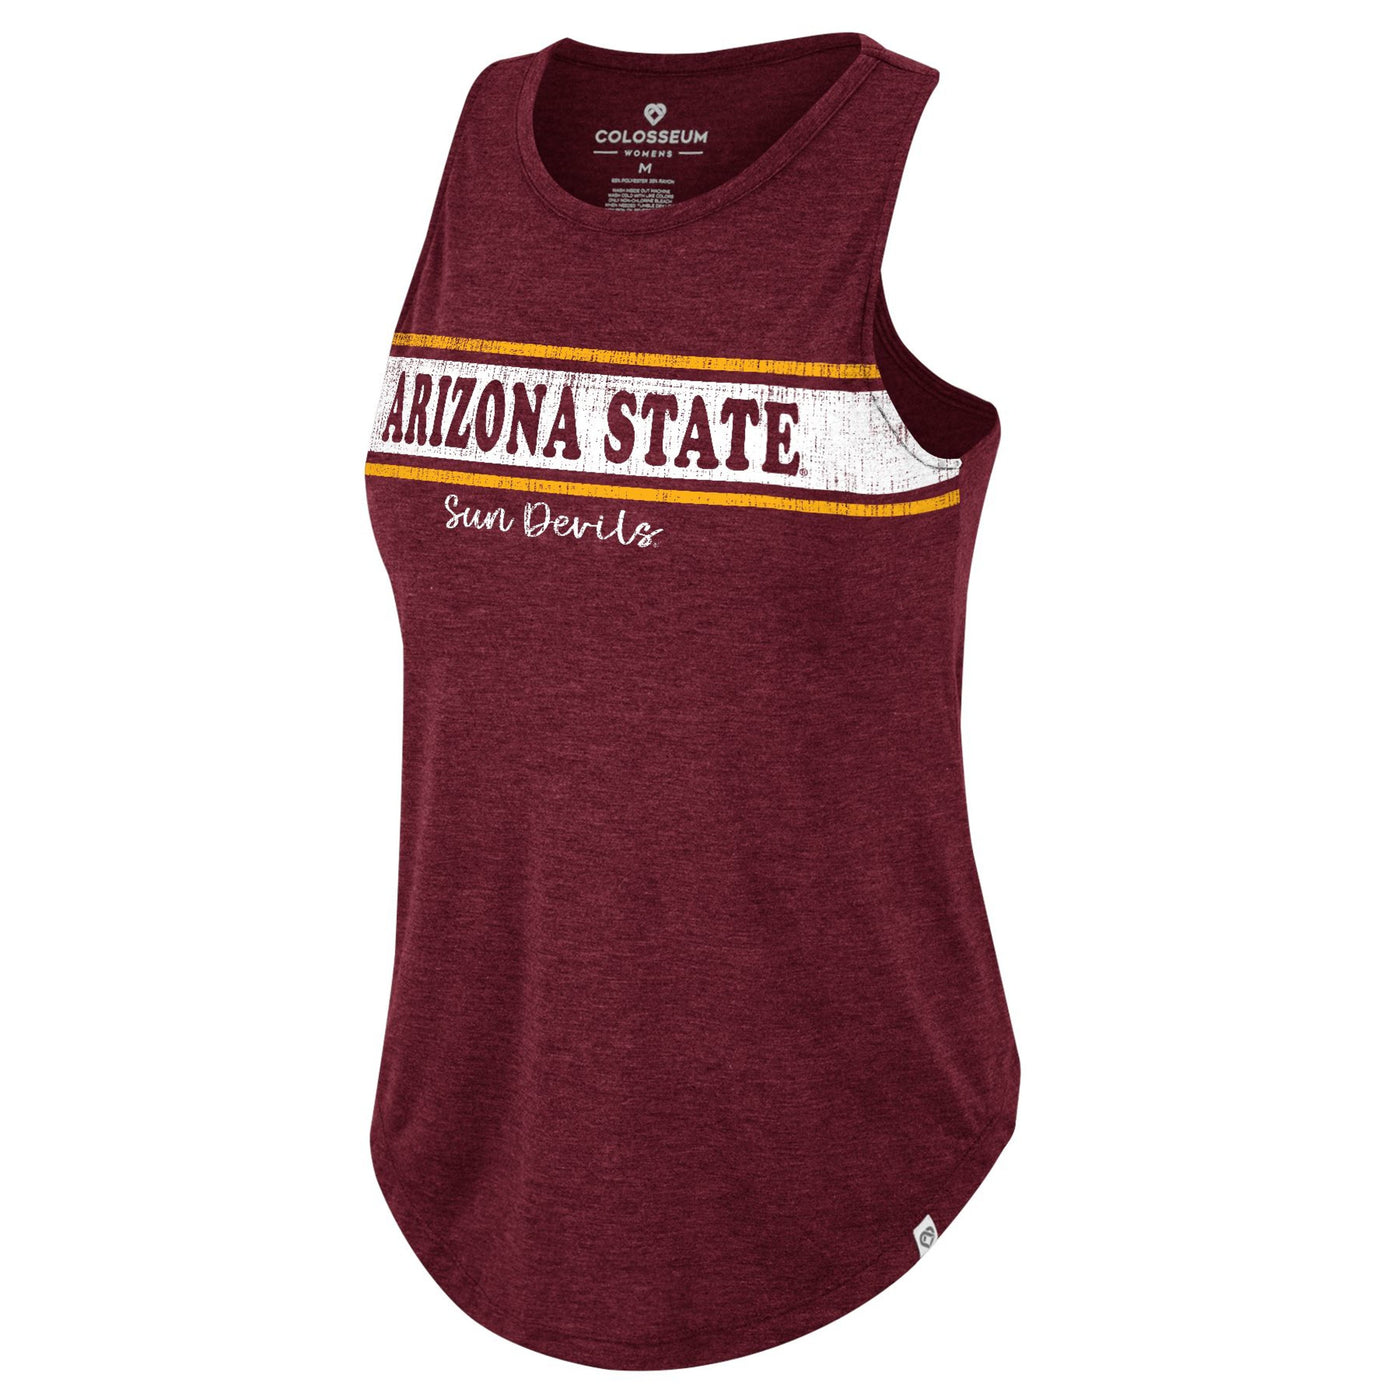 ASU maroon women's tank. There are three stripes on the front. Two smaller gold stripes on the top and bottom of a larger white stripe. within the white stripe is the text 